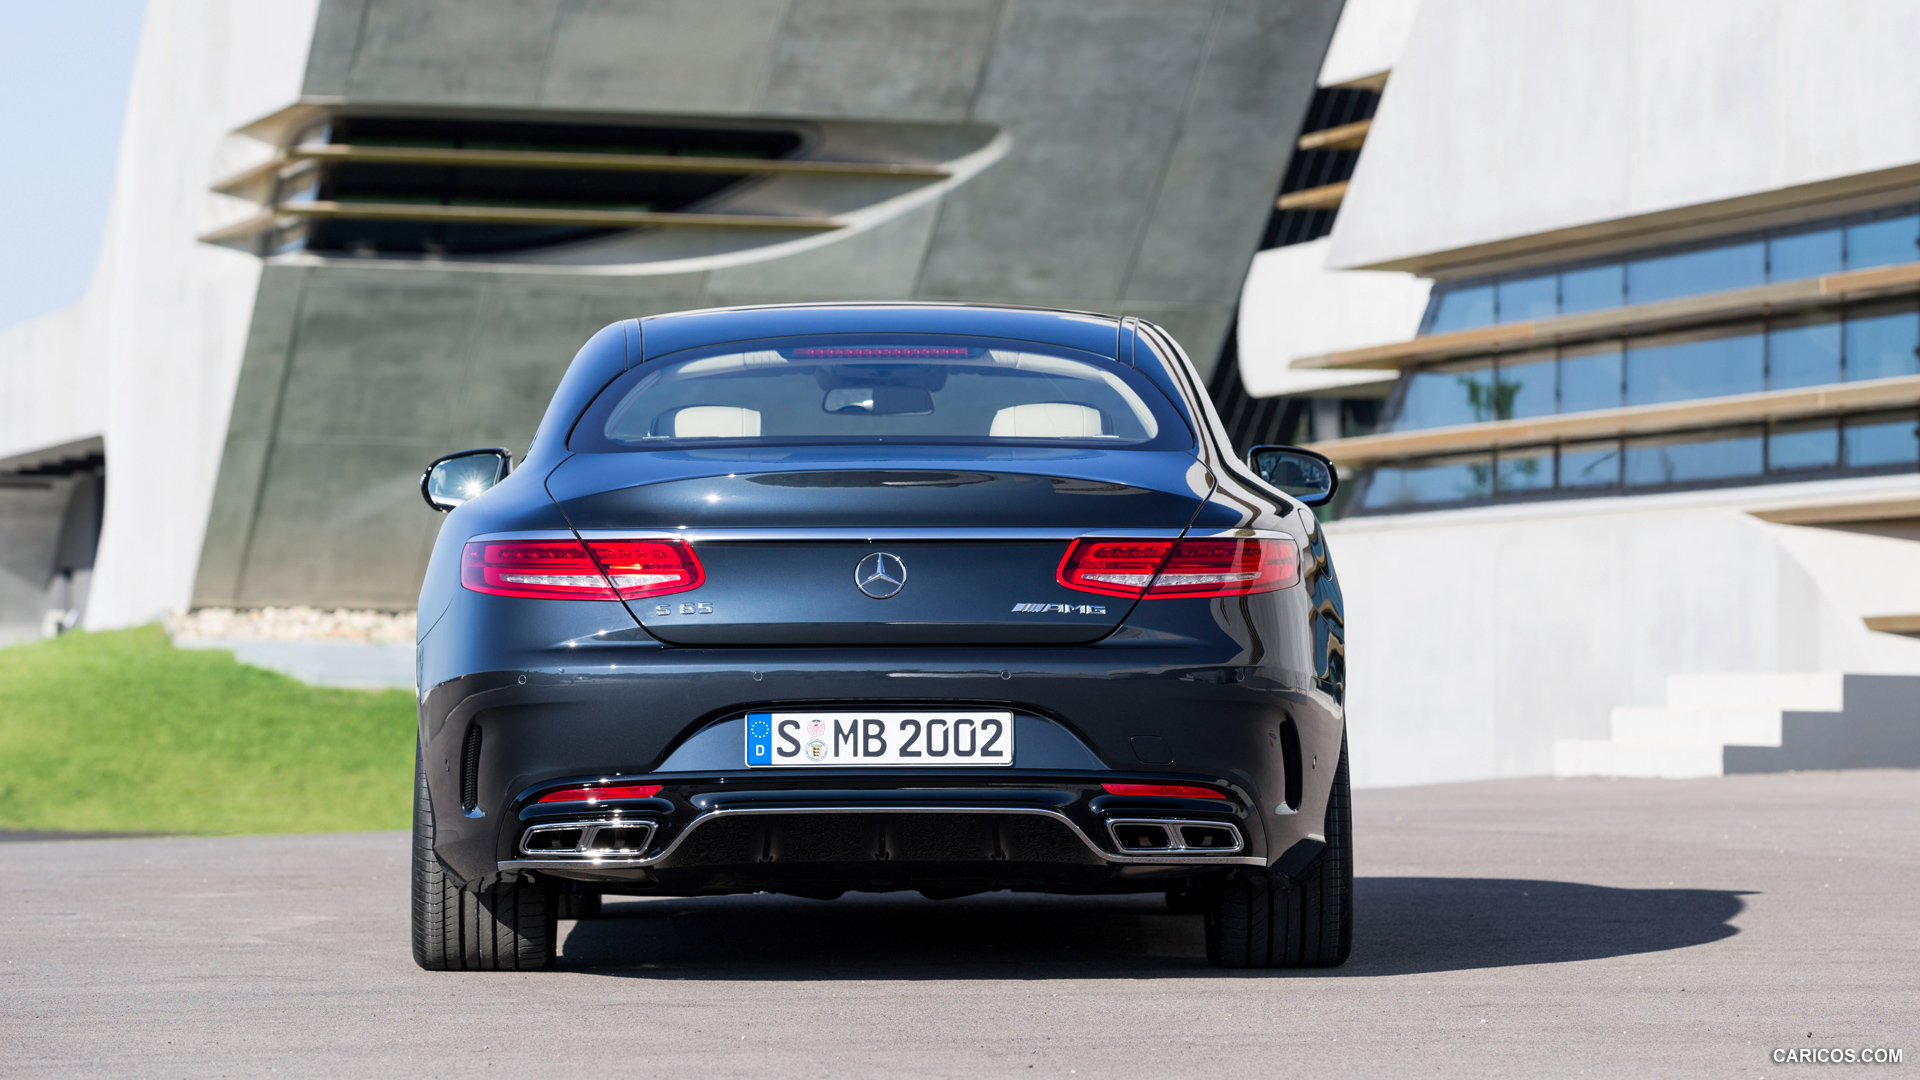 2015 Mercedes-Benz S65 AMG Coupe (Anthracite Blue) - Rear, #6 of 101